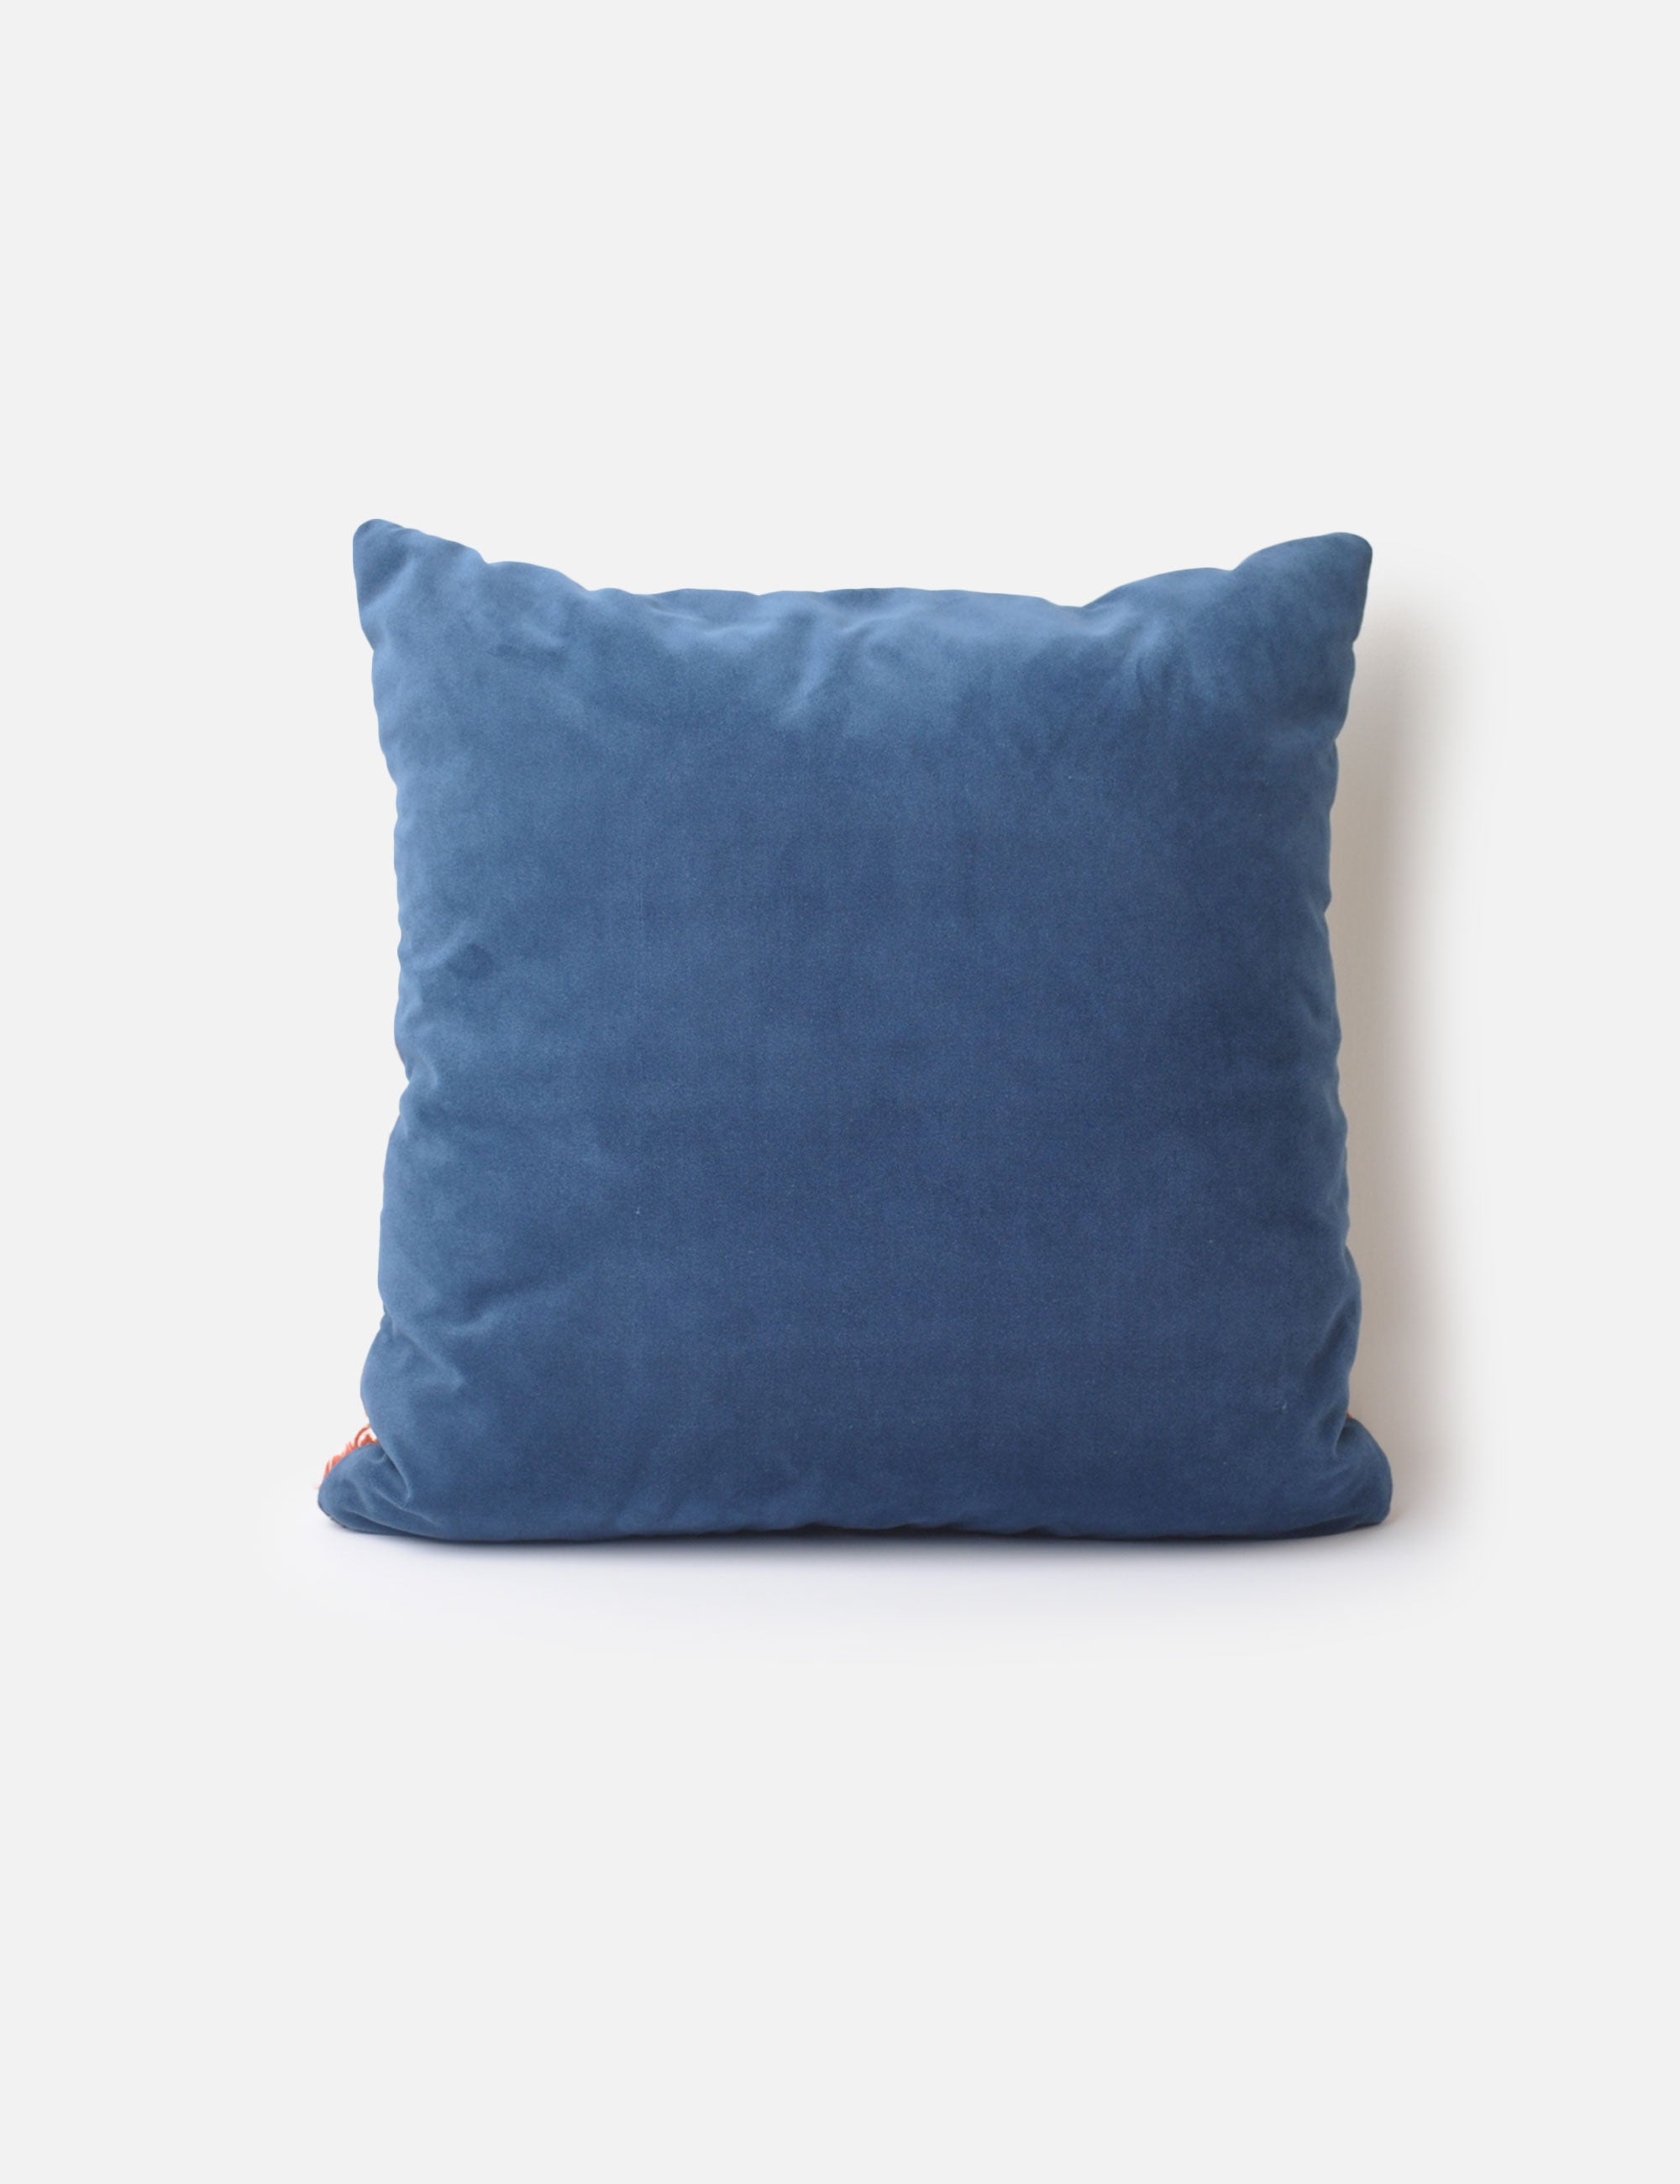 Morning Glory - Limited Edition Custom Pillow